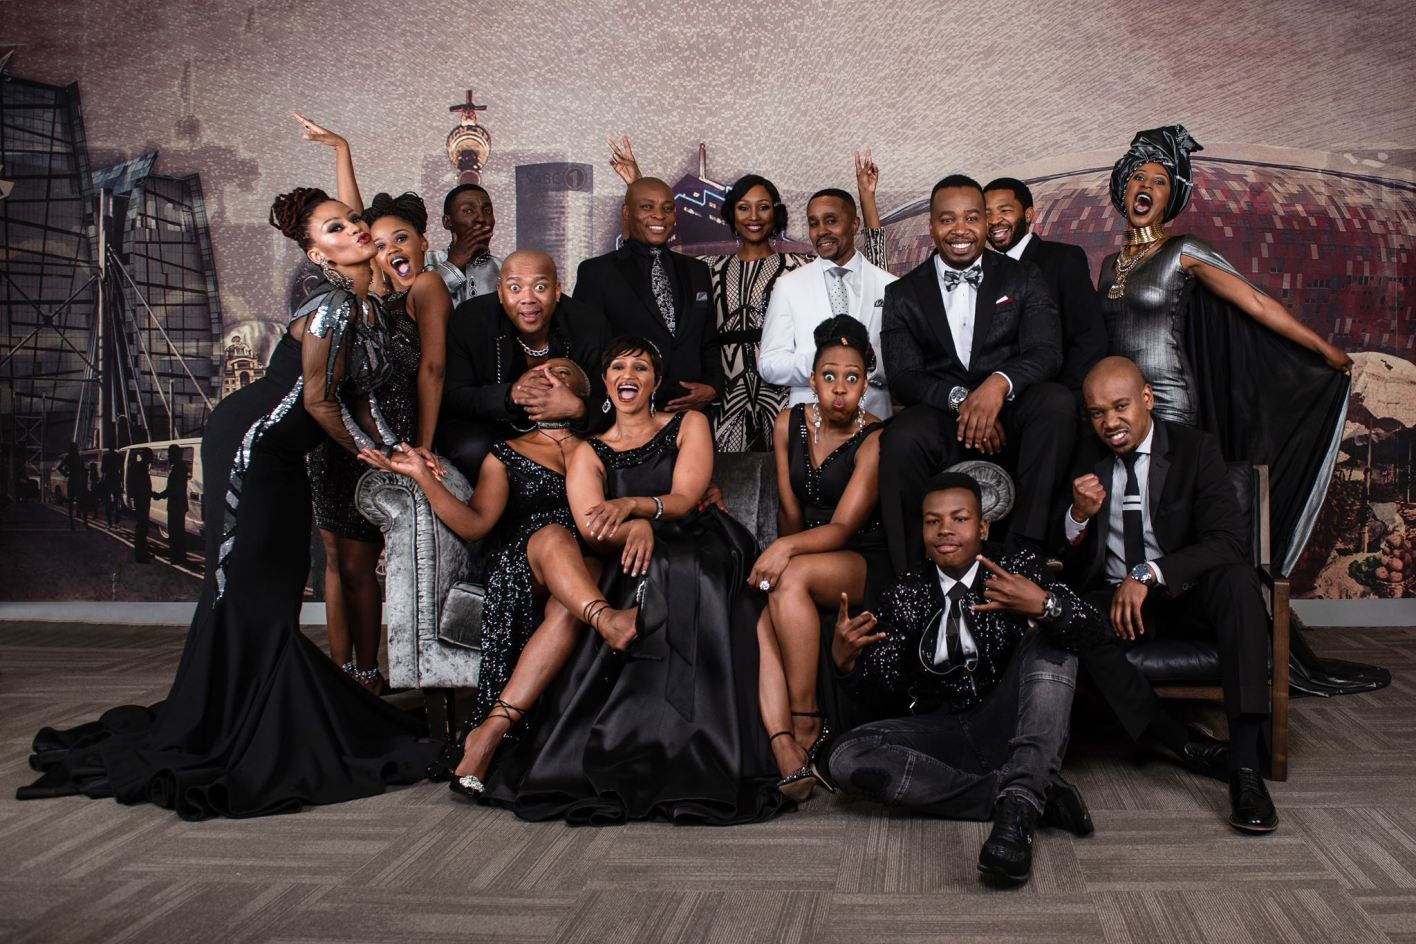 Generations: The Legacy halts production after reported positive Covid-19 cases